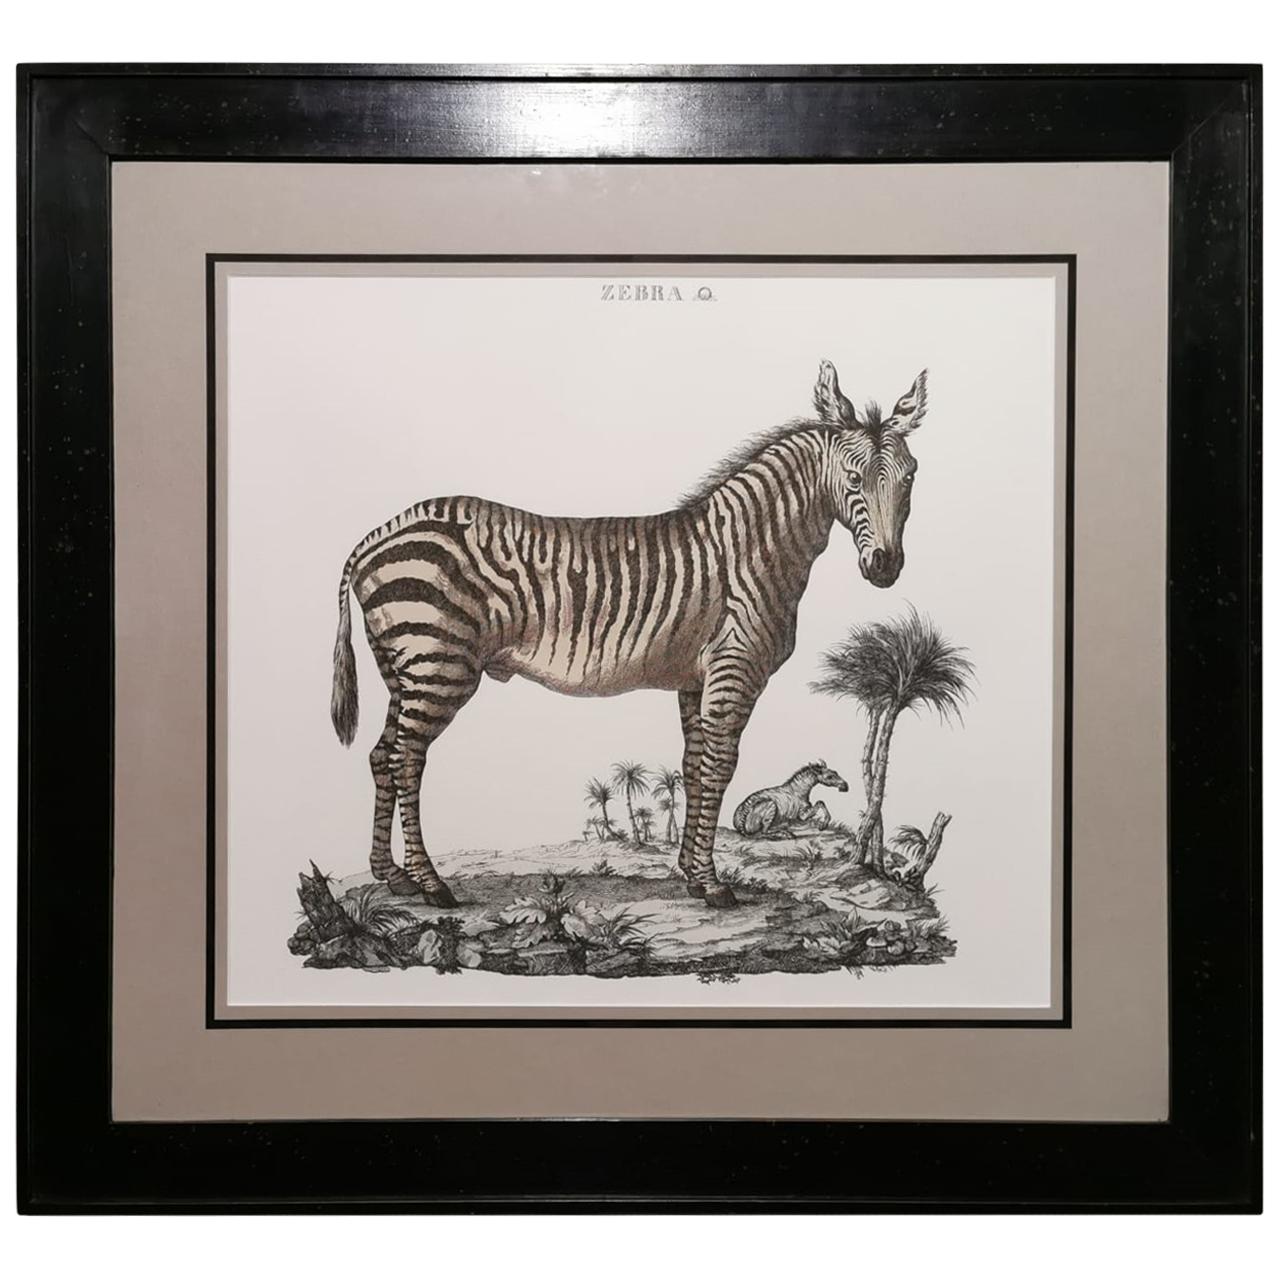 Contemporary Jungle Style Zebra Hand Watercolored Print with Black Coated Frame